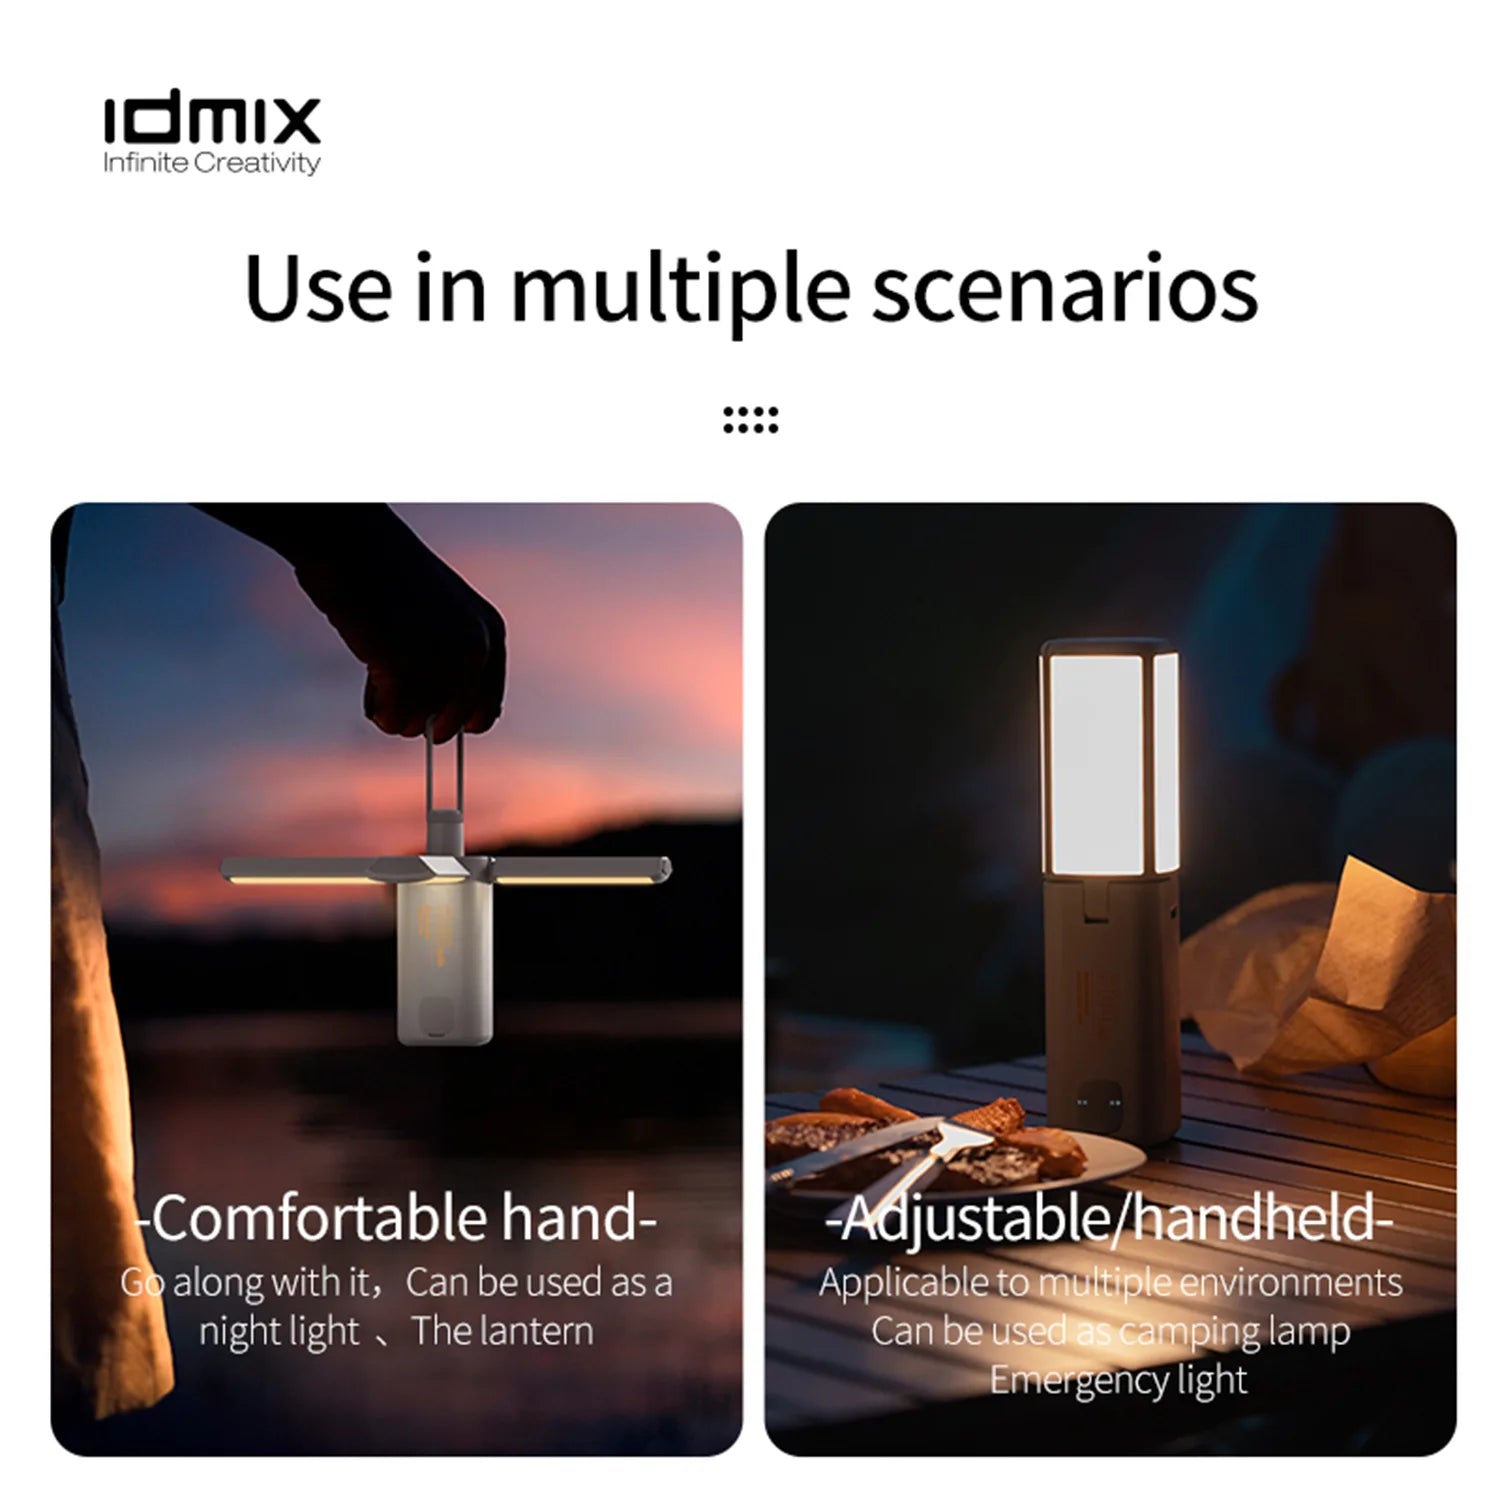 IDMIX Portable LED Camping Lantern with Power Bank Function Lightweight Waterproof Type-C Rechargeable LED Flashlight Survival Kits for Indoor Outdoor Home Emergency Light Power Outages Hiking, Grey